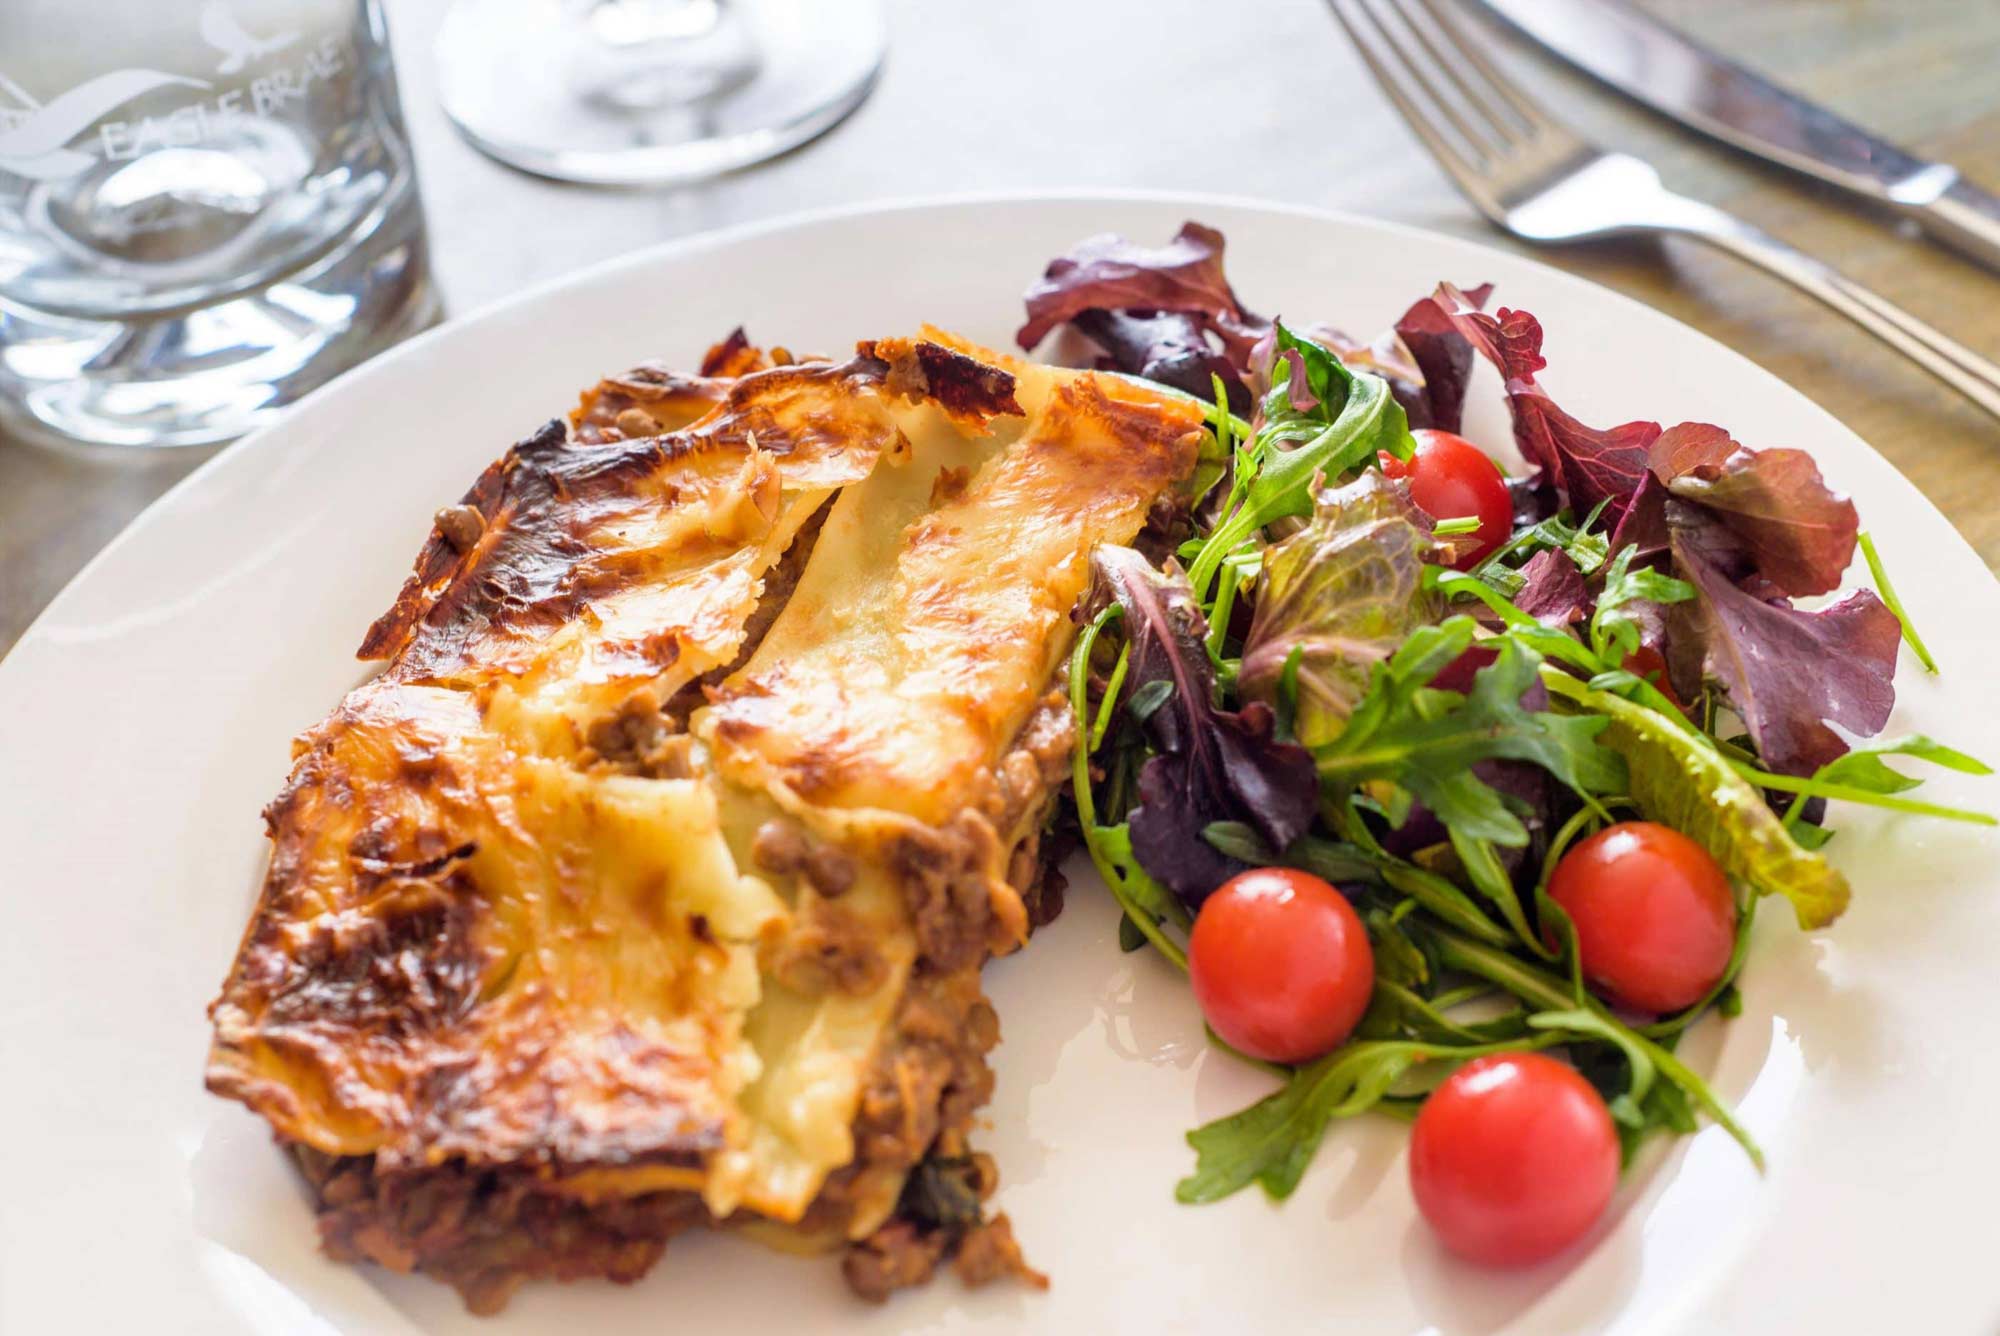 Lasagne and salad on a plate